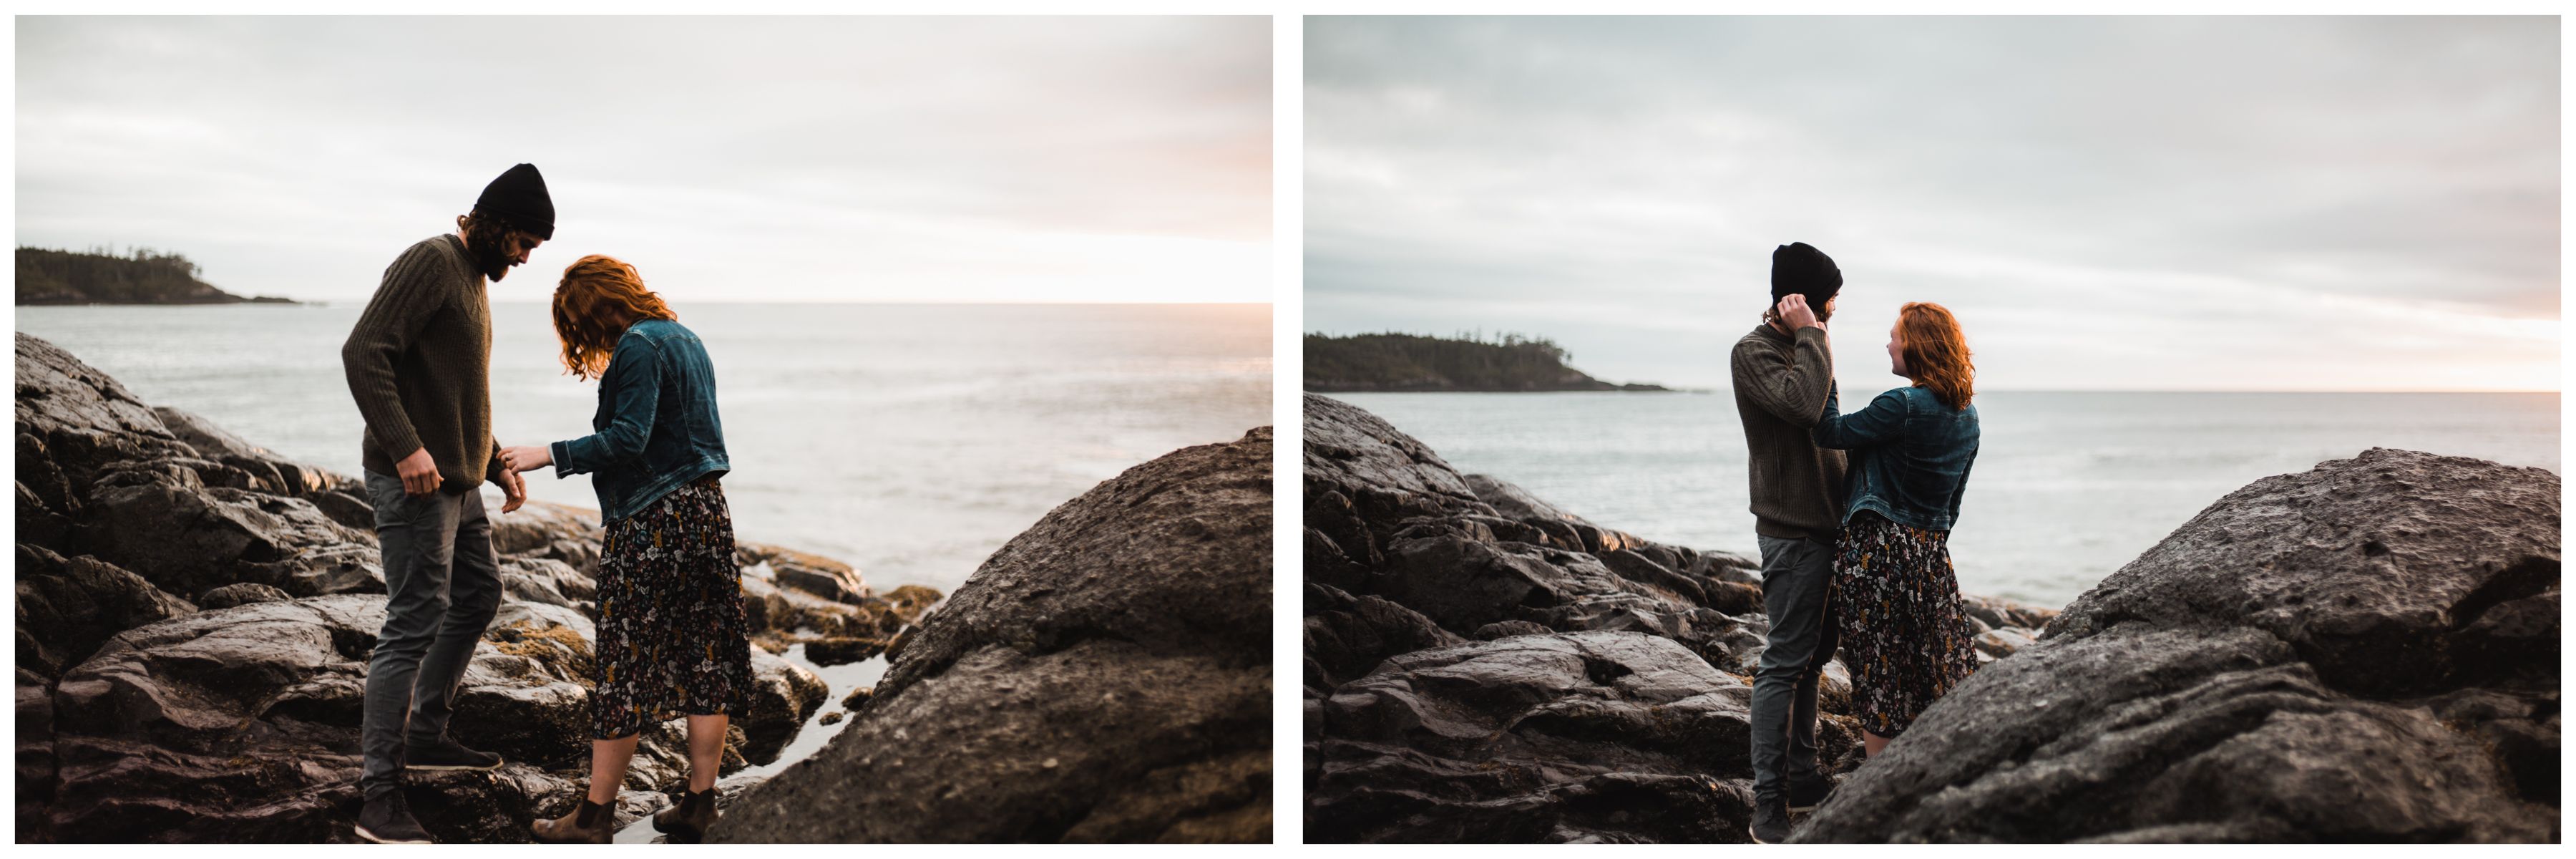 Tofino wedding photographer for a destination engagement photography session on Vancouver Island, BC - Image 16